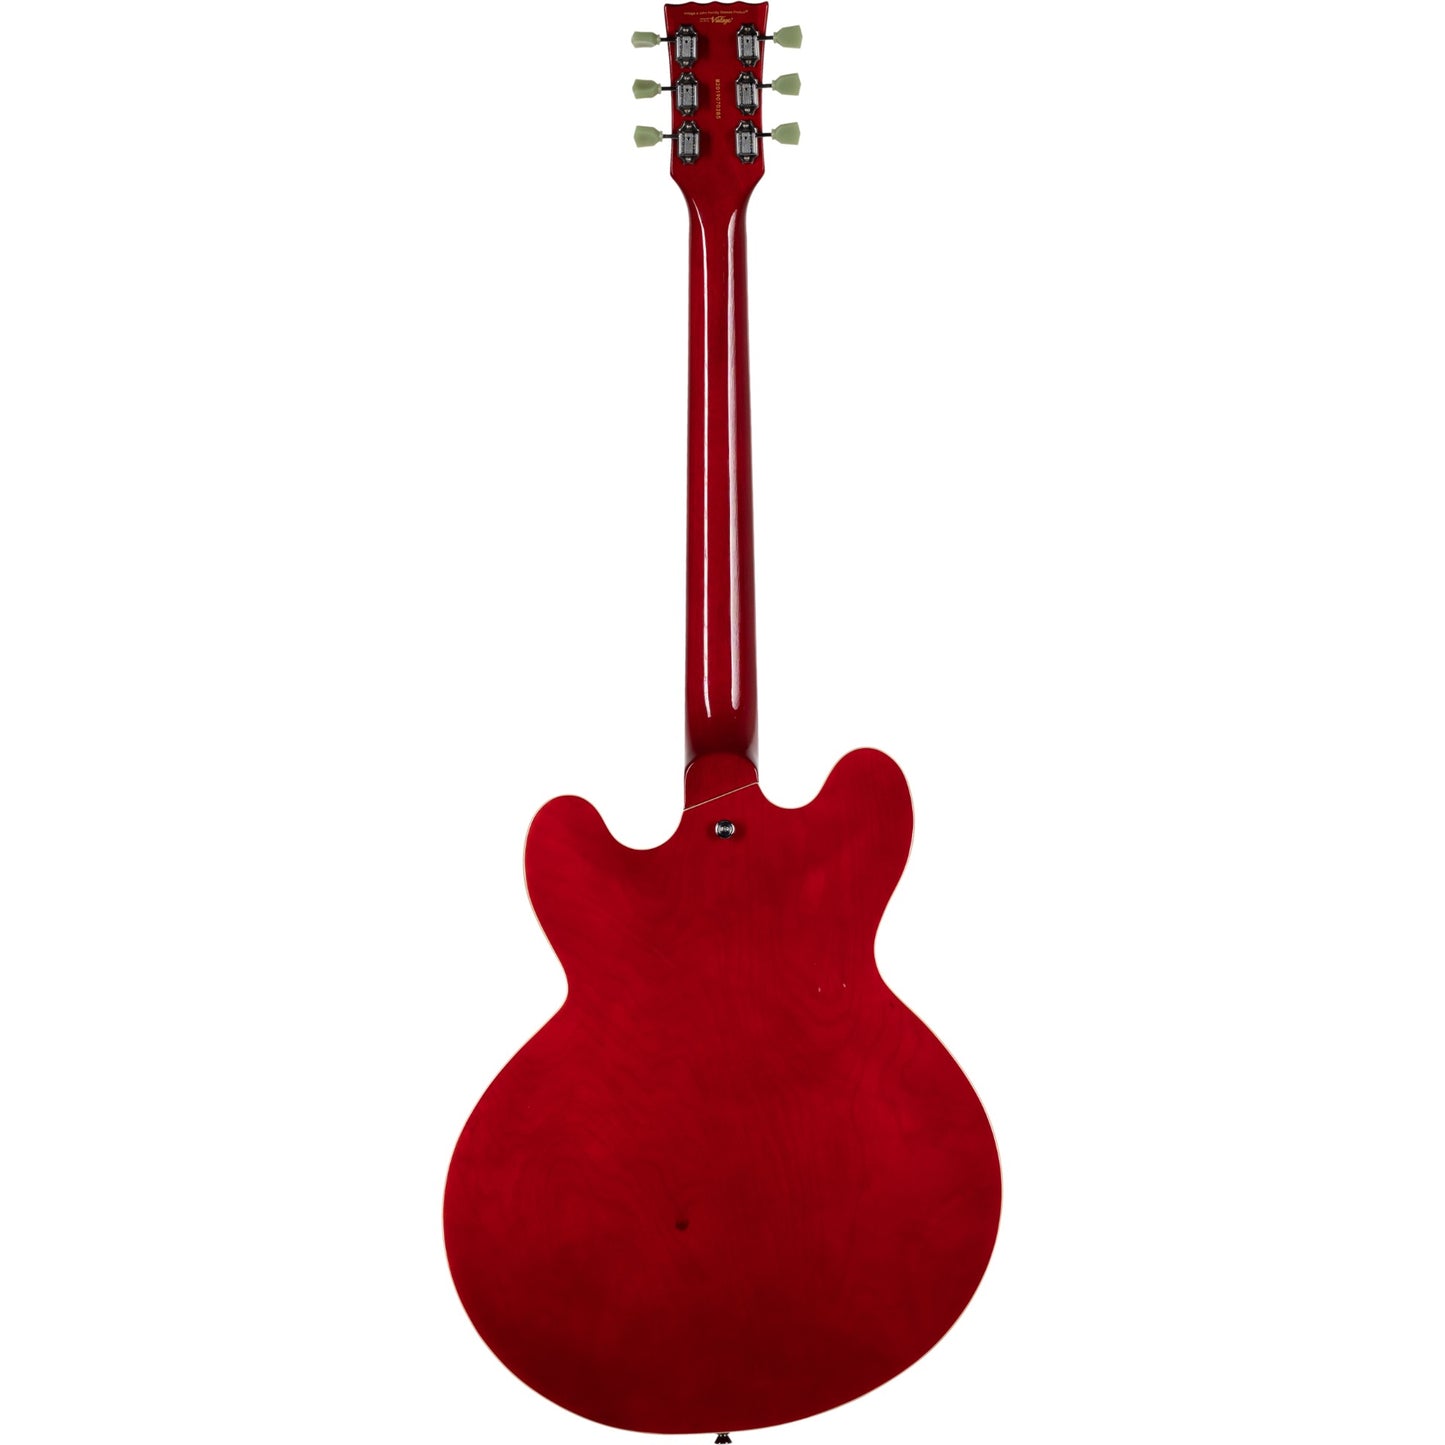 Vintage Reissue VSA500CR Cherry Red ES Style Semi Hollow Electric Guitar (VSA500CR)